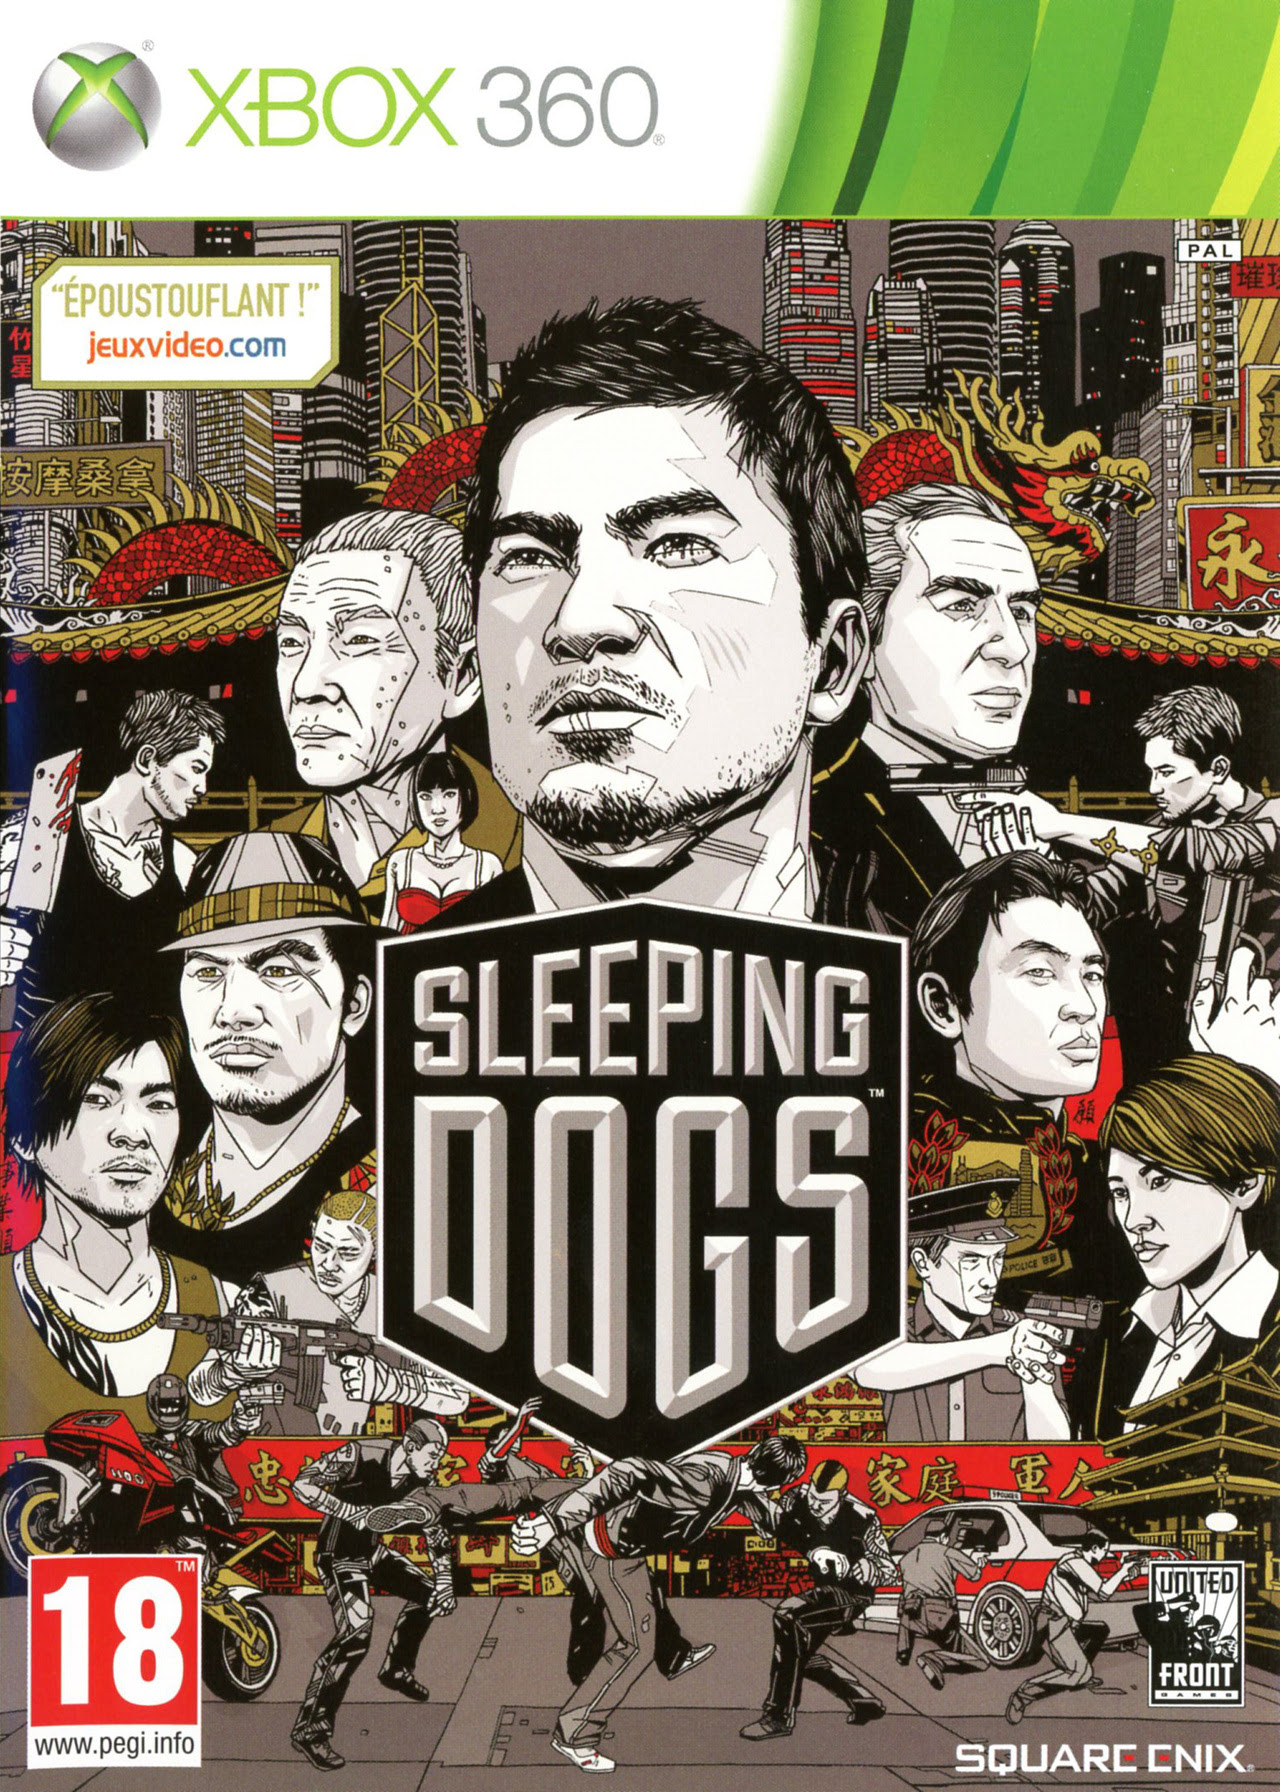 Download Sleeping Dogs The Wheels of Fury Pack DLC XBOX360-MoNGoLS ...